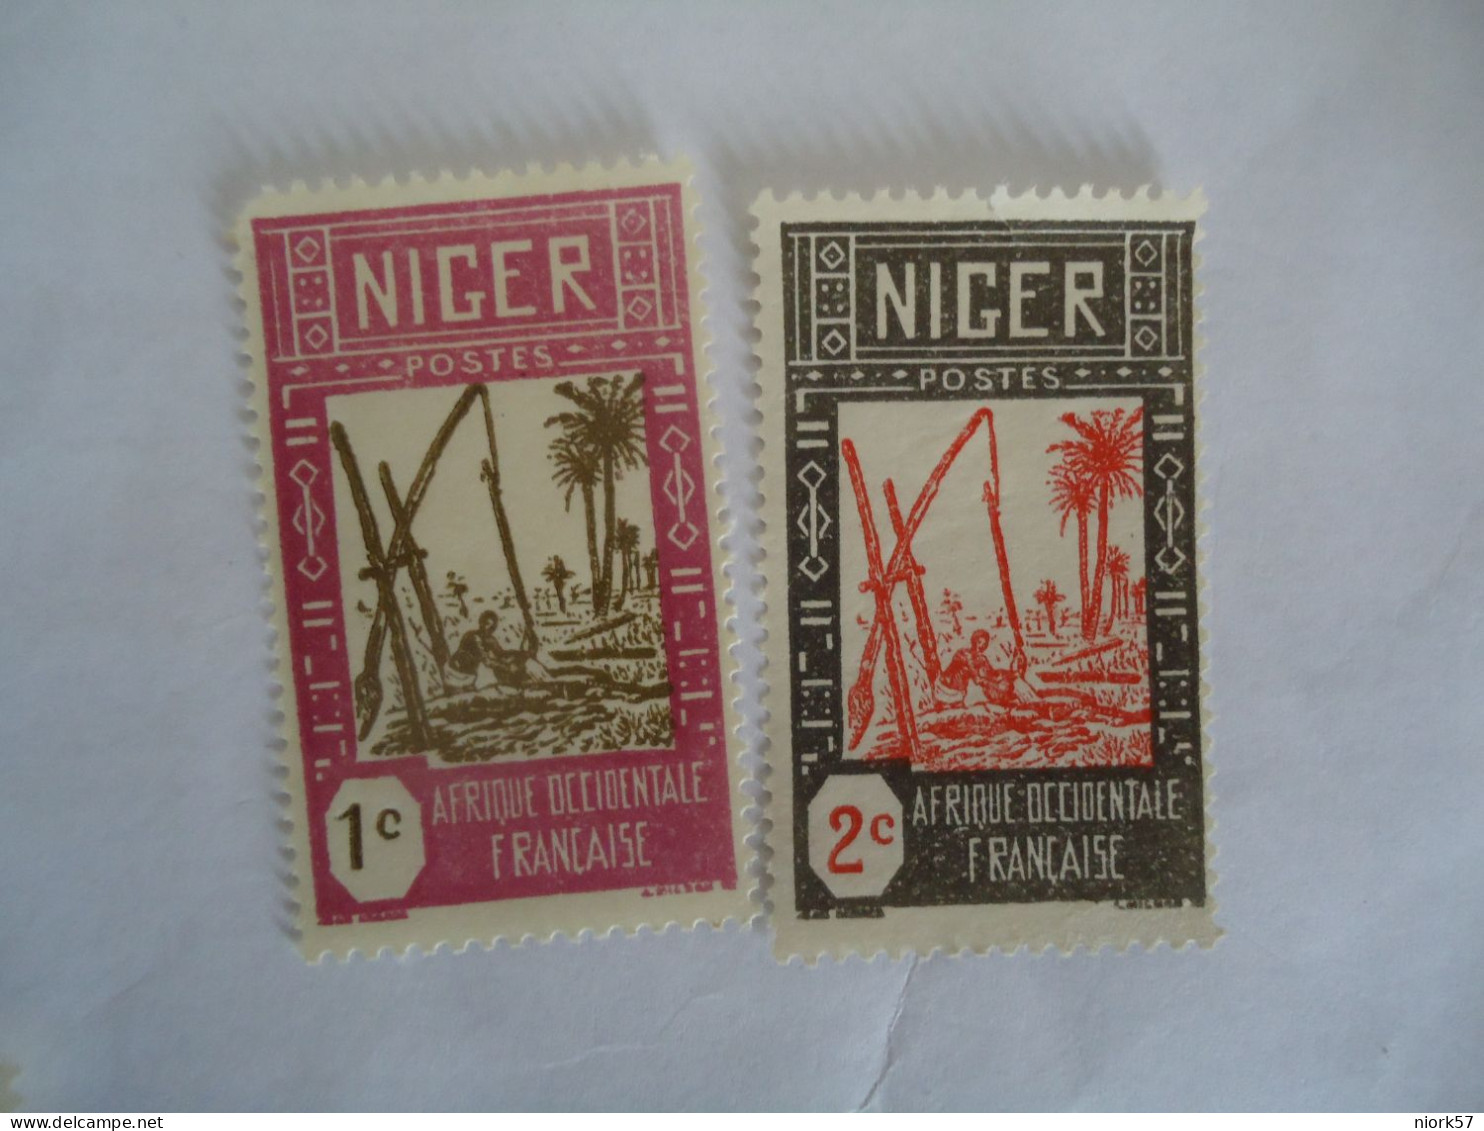 NIGER MLN 2 STAMPS WORKERS - Unused Stamps